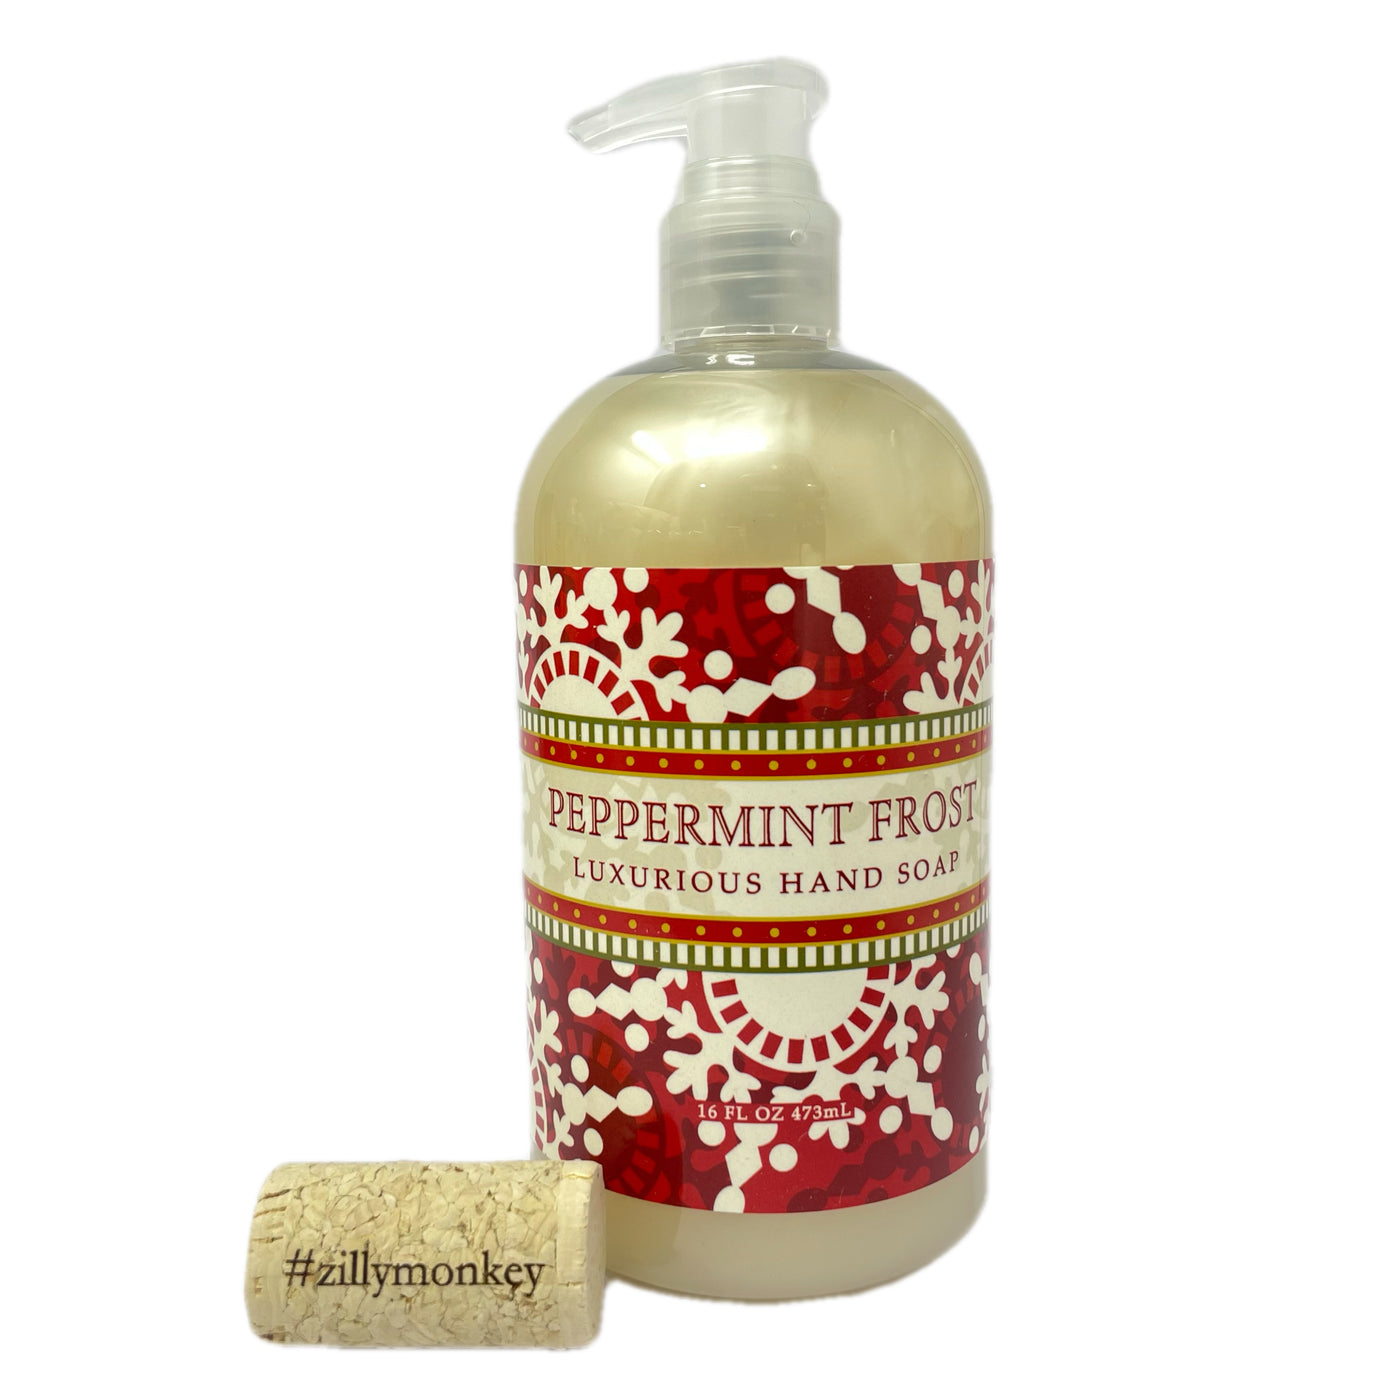 Peppermint Frost Hand Soap